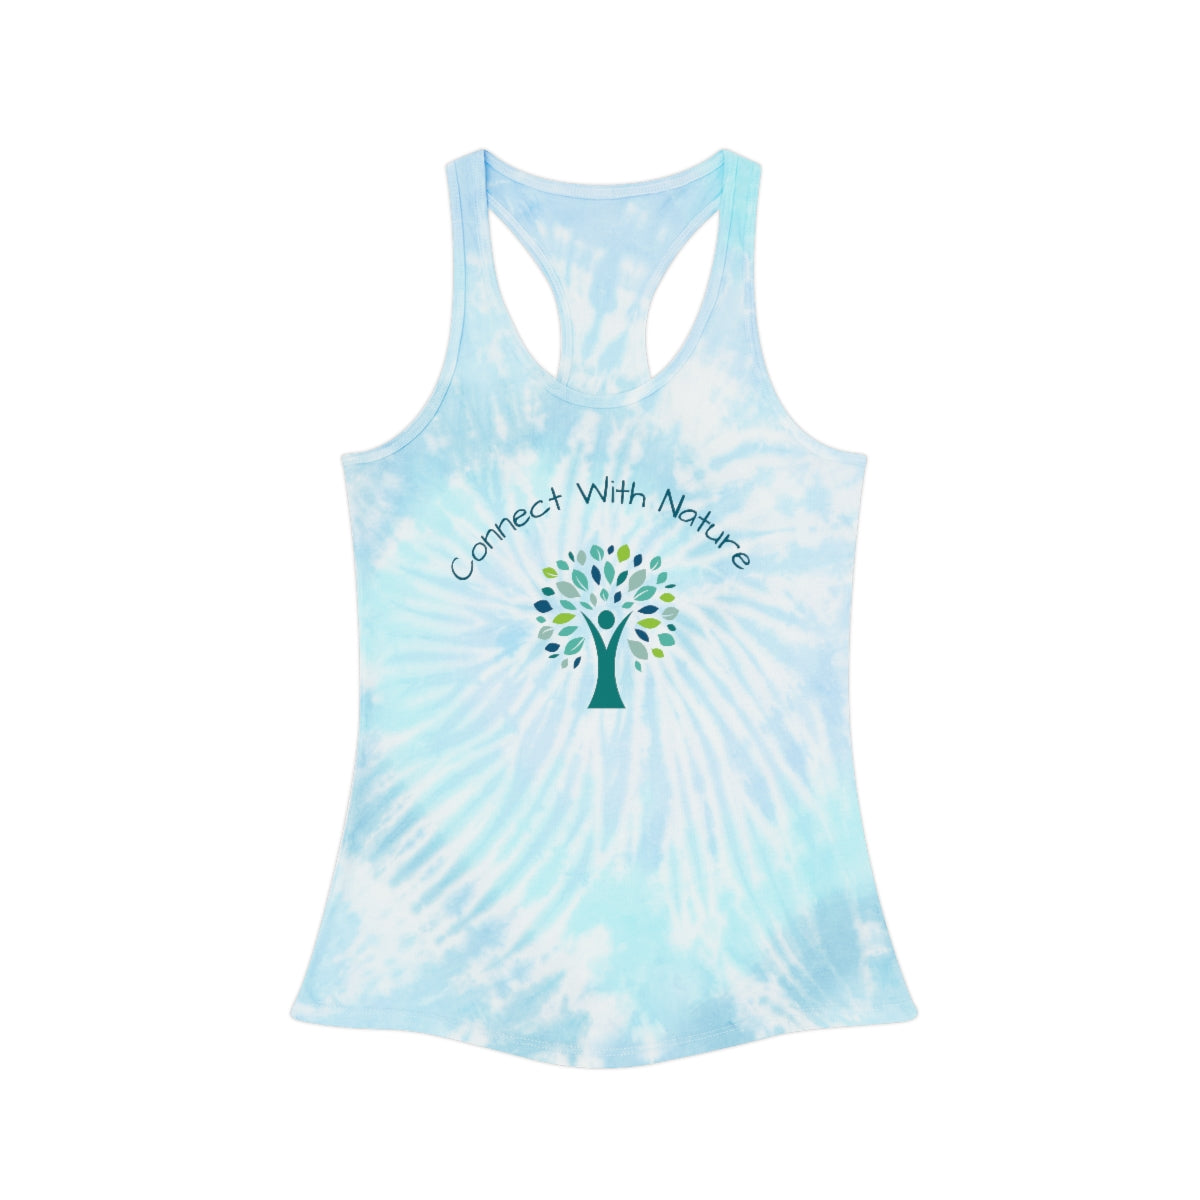 Connect With Nature Lagoon Teal Tye Dye Tank